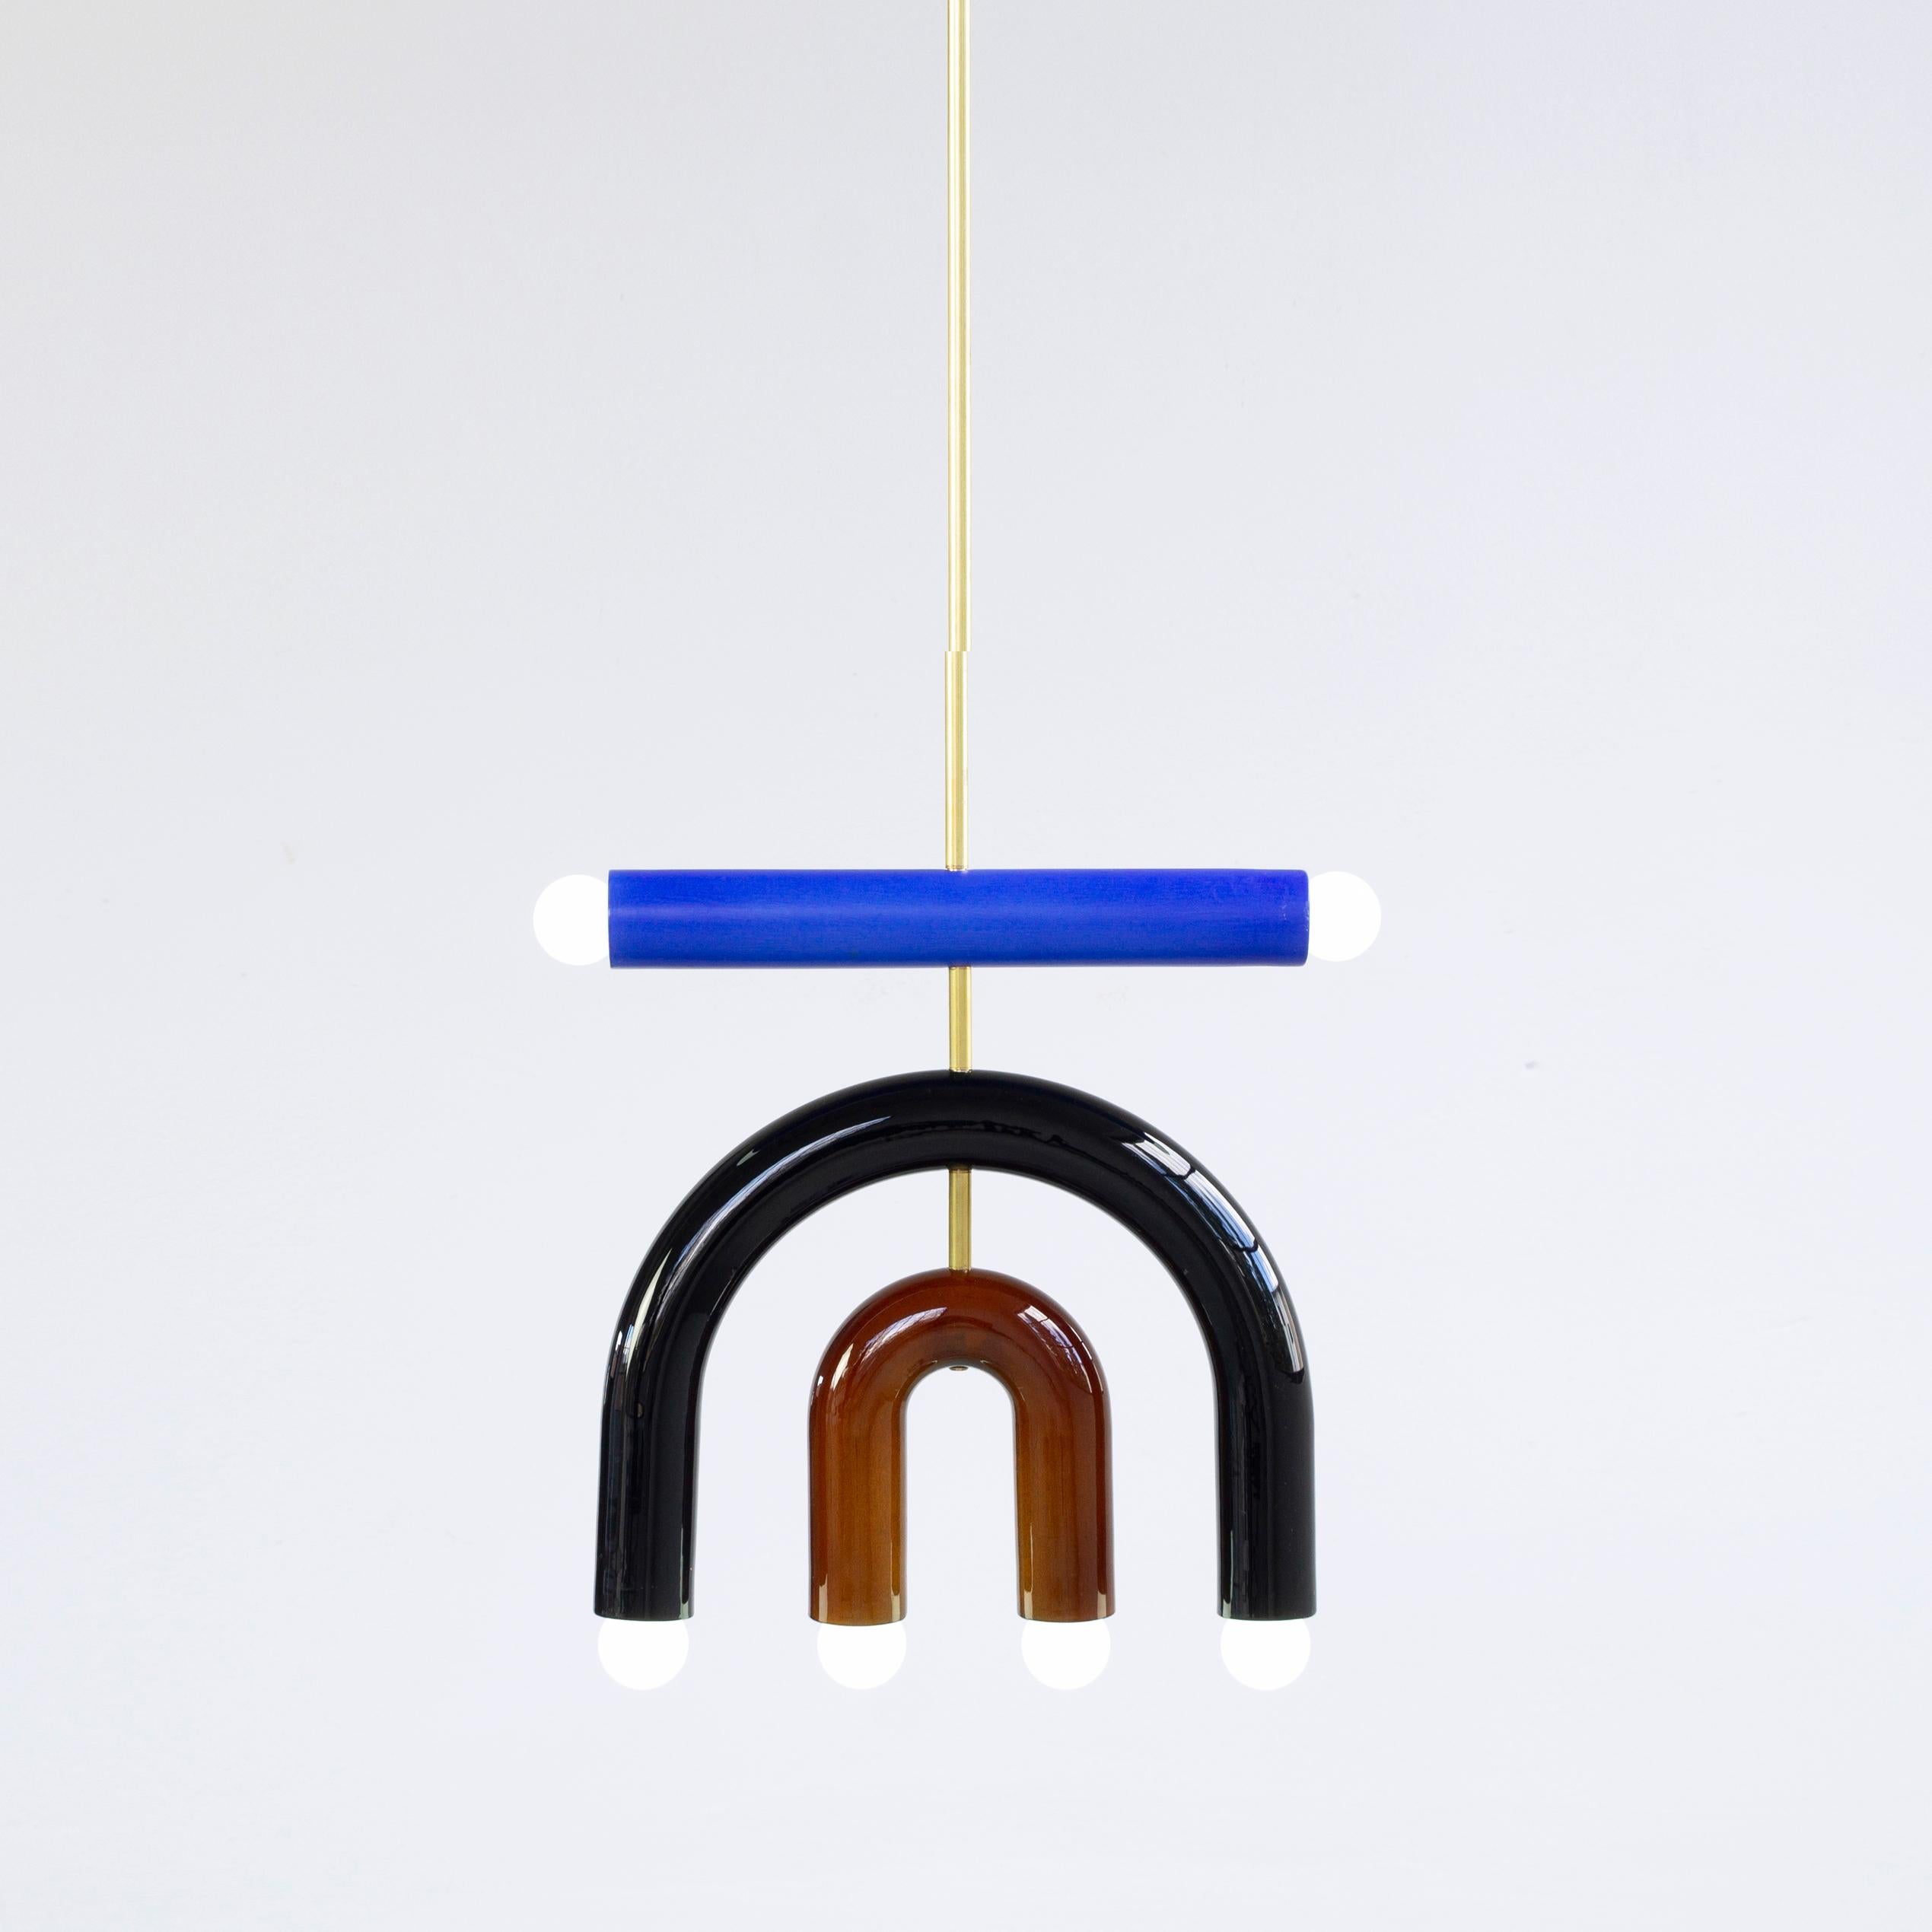 The lighting fixture is part of TRN collection. Three dimensional objects inspired by Tarasin painting have a simple calligraphic form so they can play and talk together as if they were letters from a non-existent alphabet.
 
The hand crafted